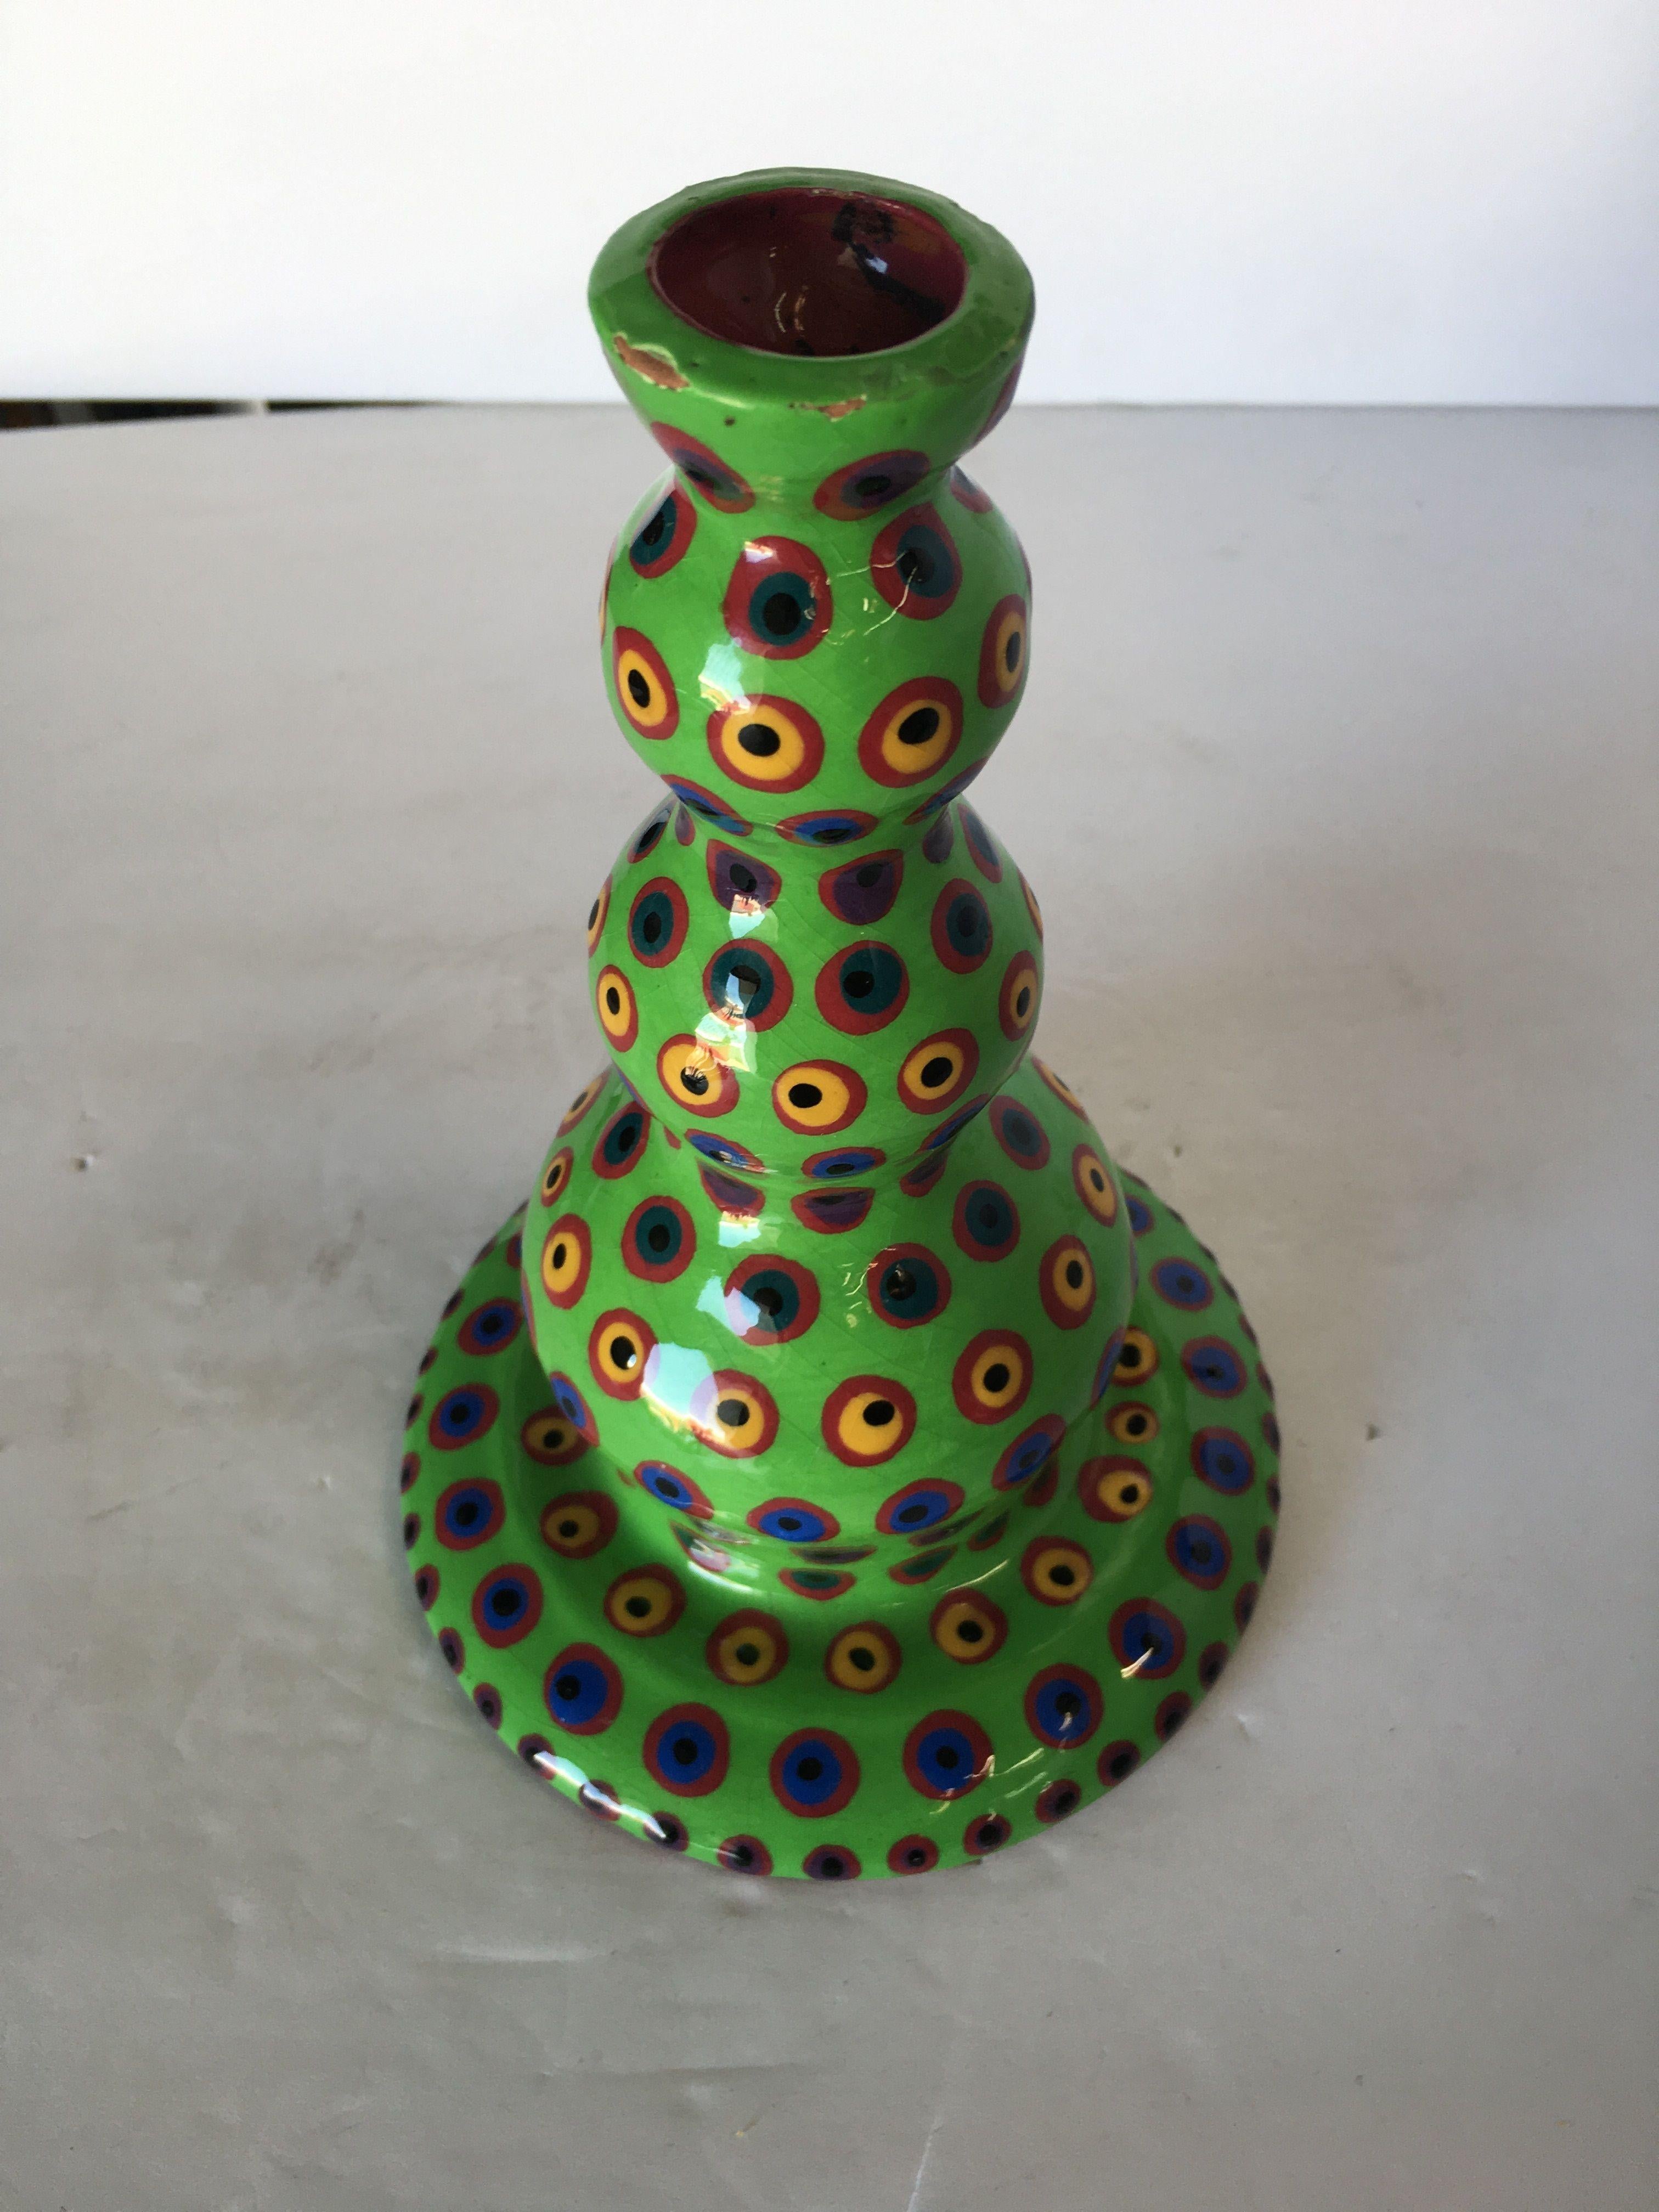 California Art Pottery Candlestick holder with green speckled psychedelic pattern design by Lynda Feman. Circa 1998